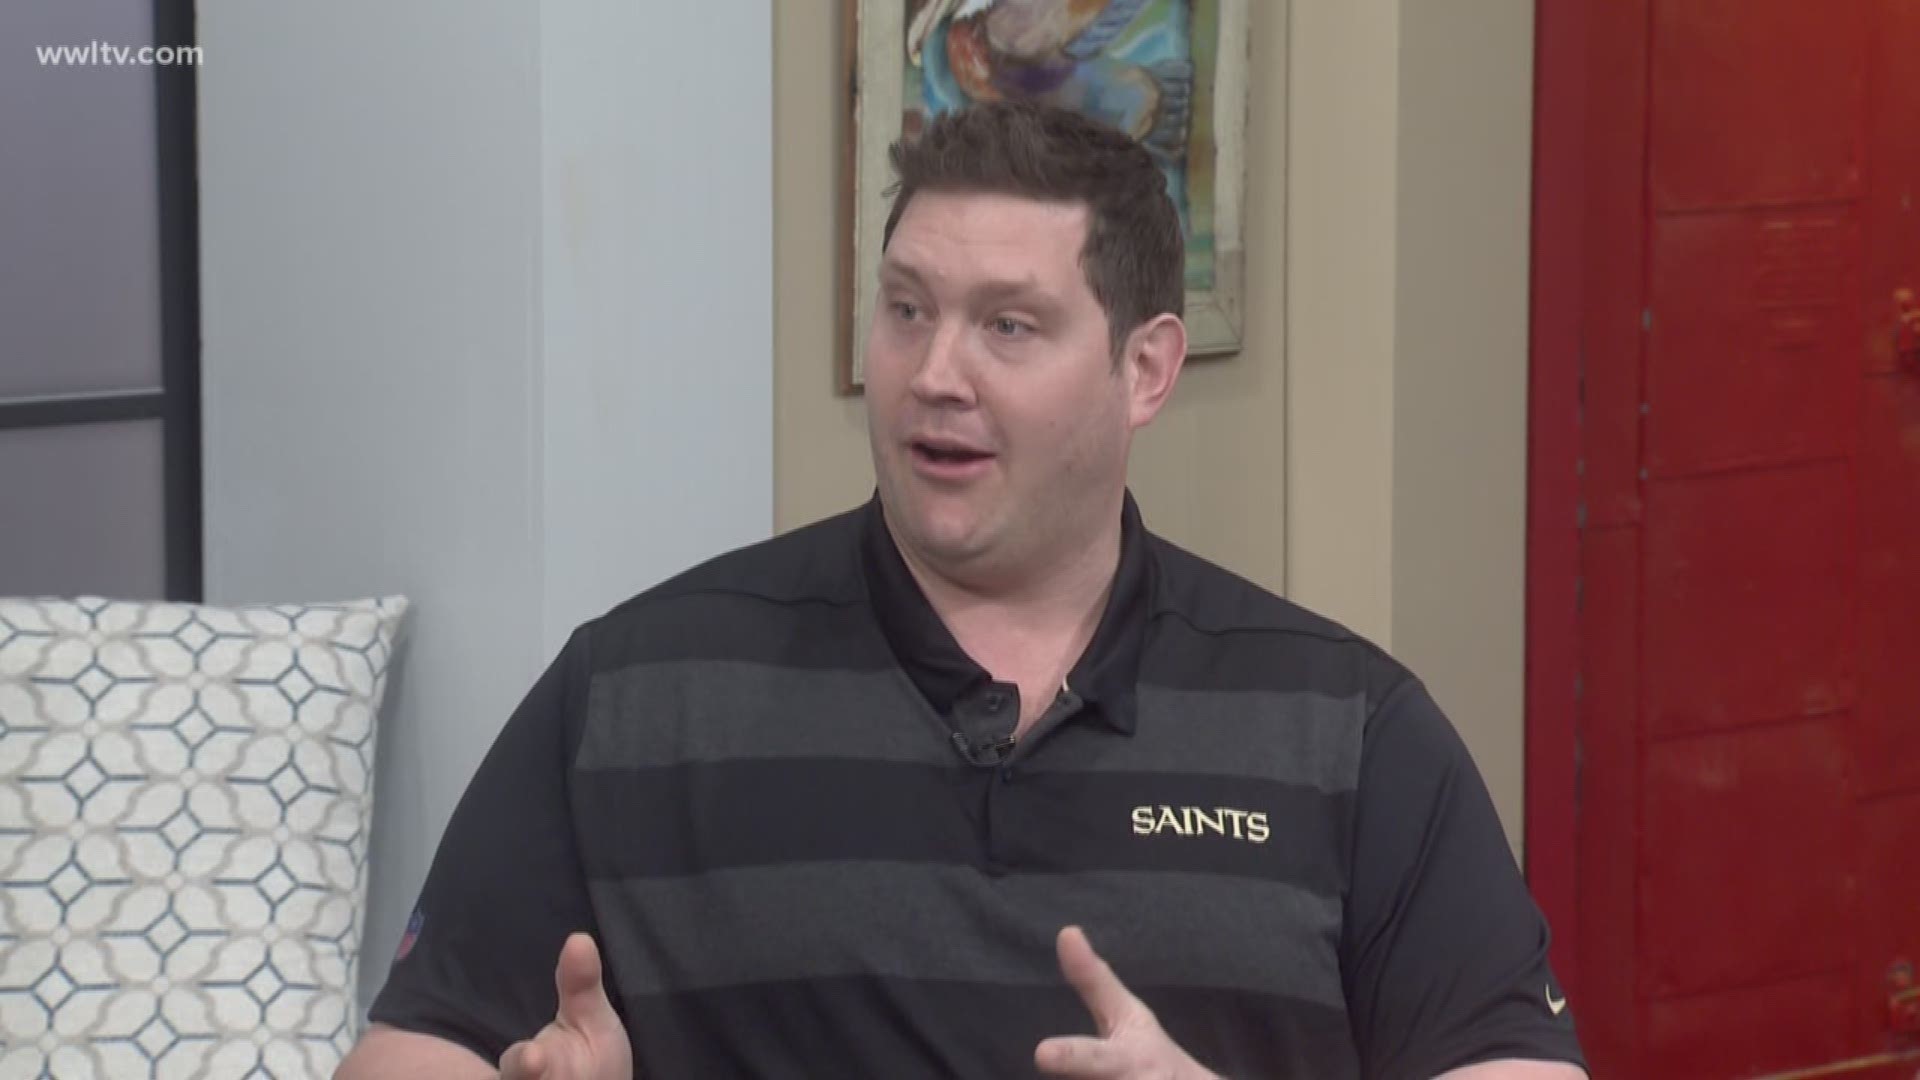 Former Saints player and WWL Radio Saints play-by-play announcer Zach Strief talks about this year's Saints season and how proud he is of his former team.